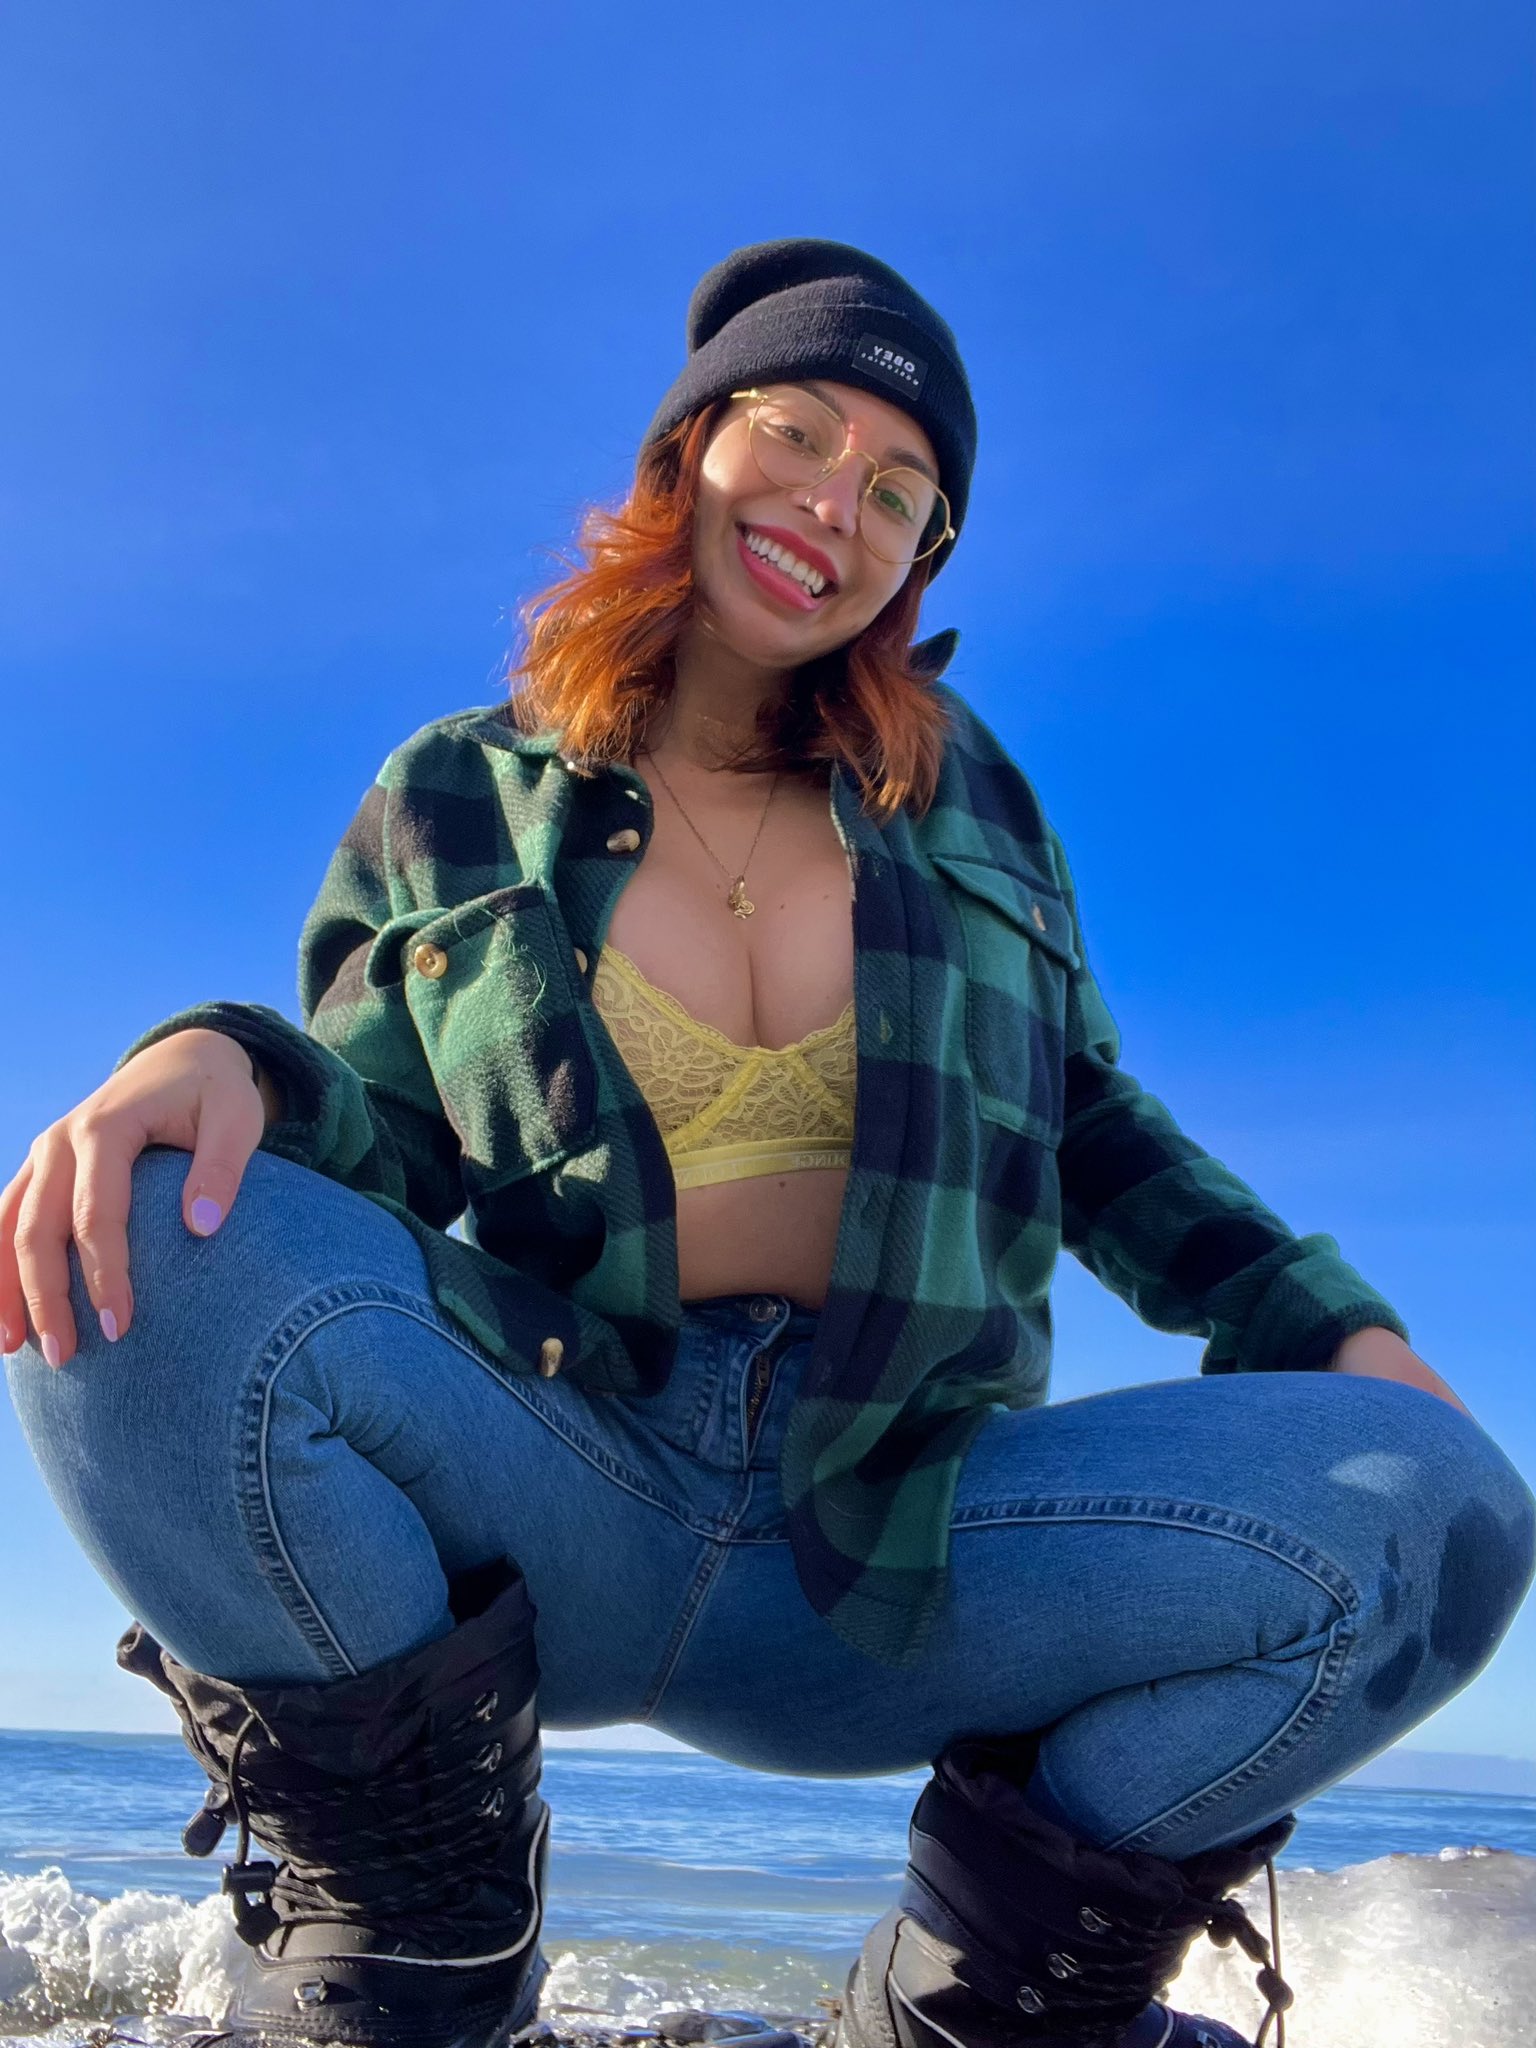 Model promo on X: RT @myladelrey: Valentine's Day idea: we go ice fishing  and make an outdoor sextape in my otter ice shelter ❄️  t.cozLPgEIZCmH  X